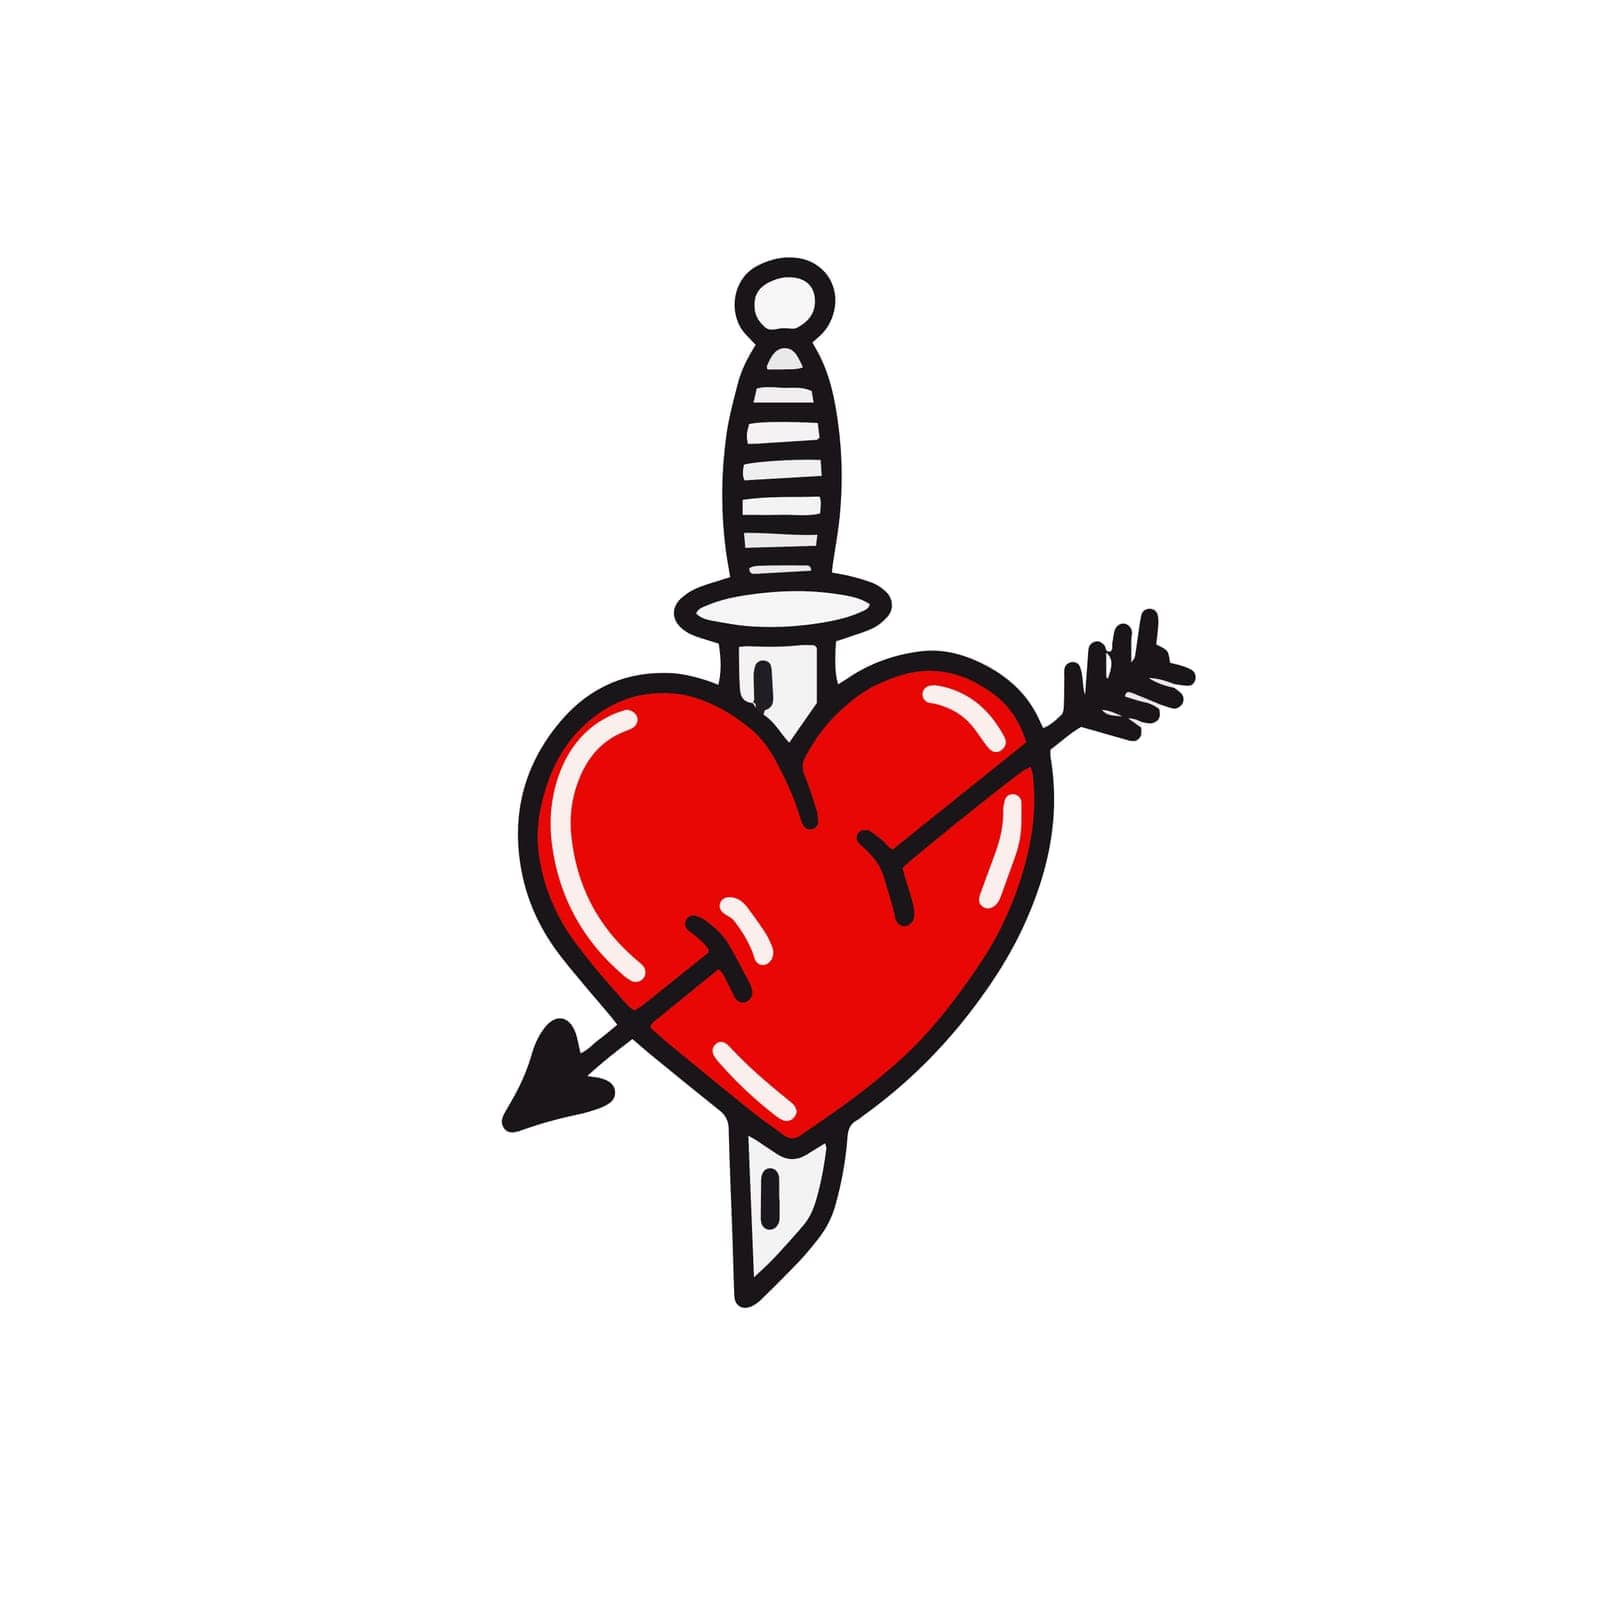 heart with a dagger in the style of old school tattoo. Vector illustration in doodle style. Vector illustration